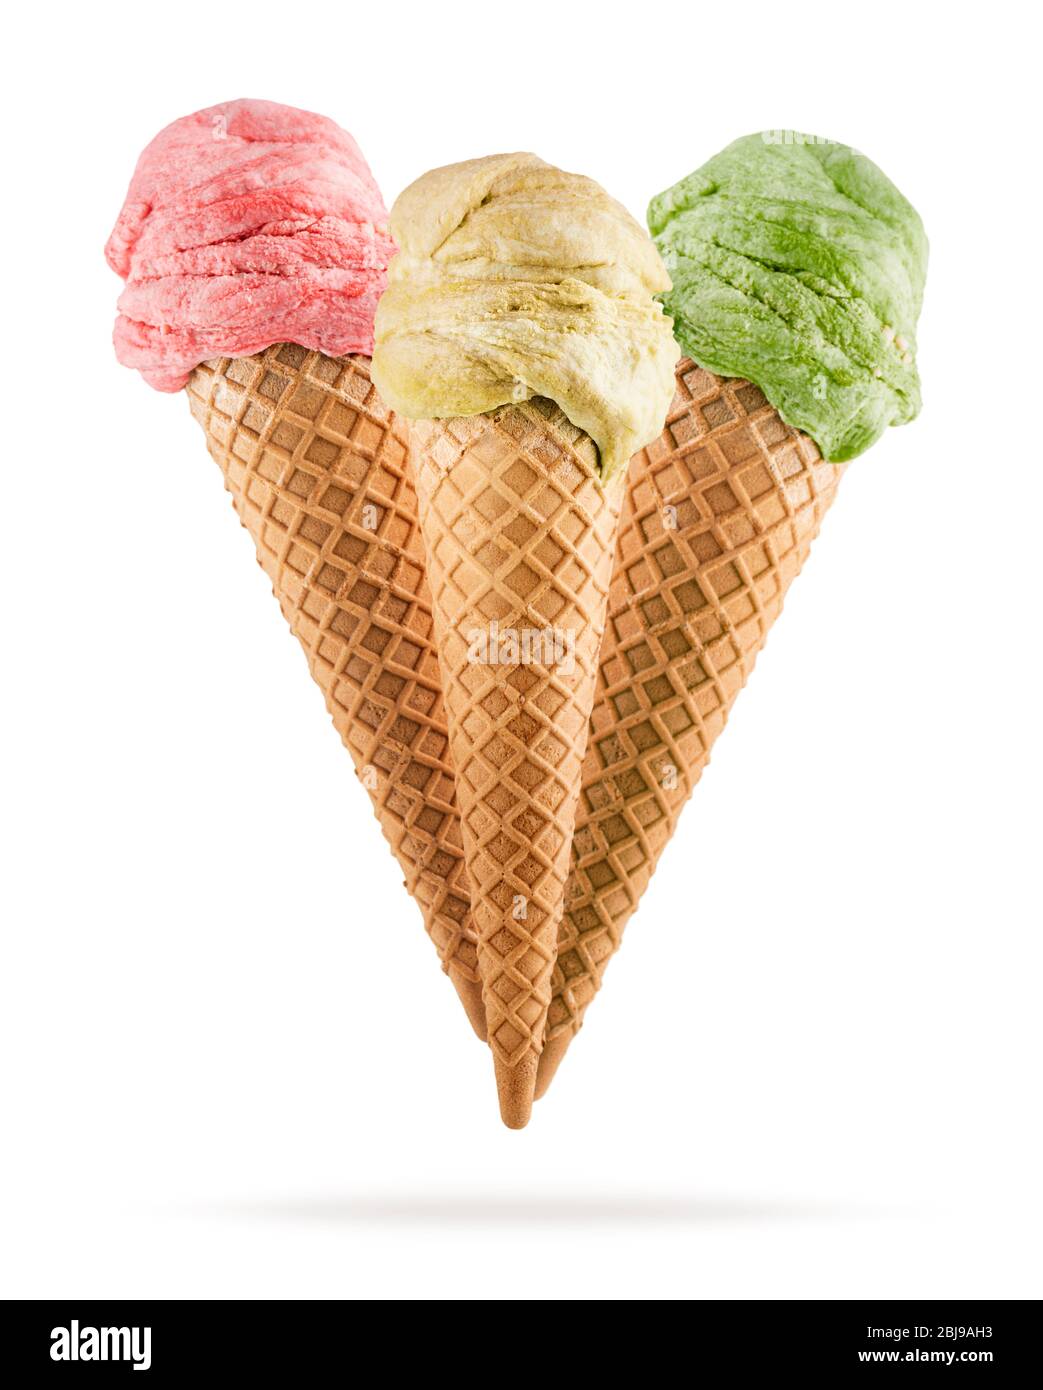 Ice cream cones with different flavors on white background Stock Photo